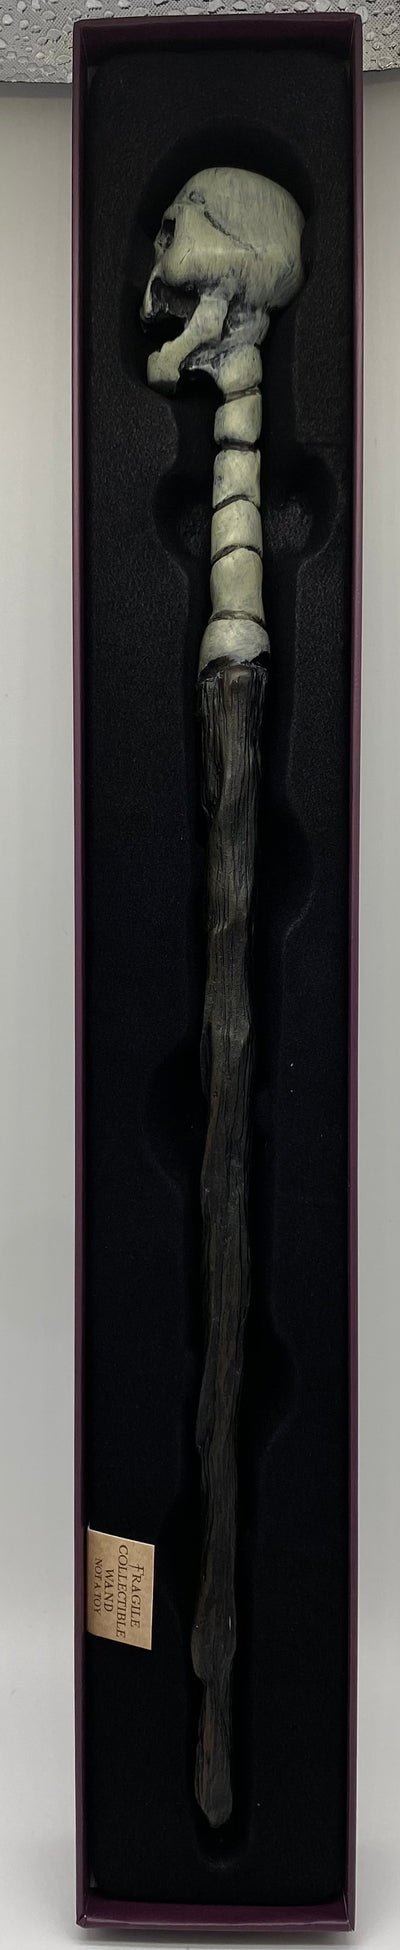 Universal Studios Death Eater Skull Wand From Harry Potter New with Box